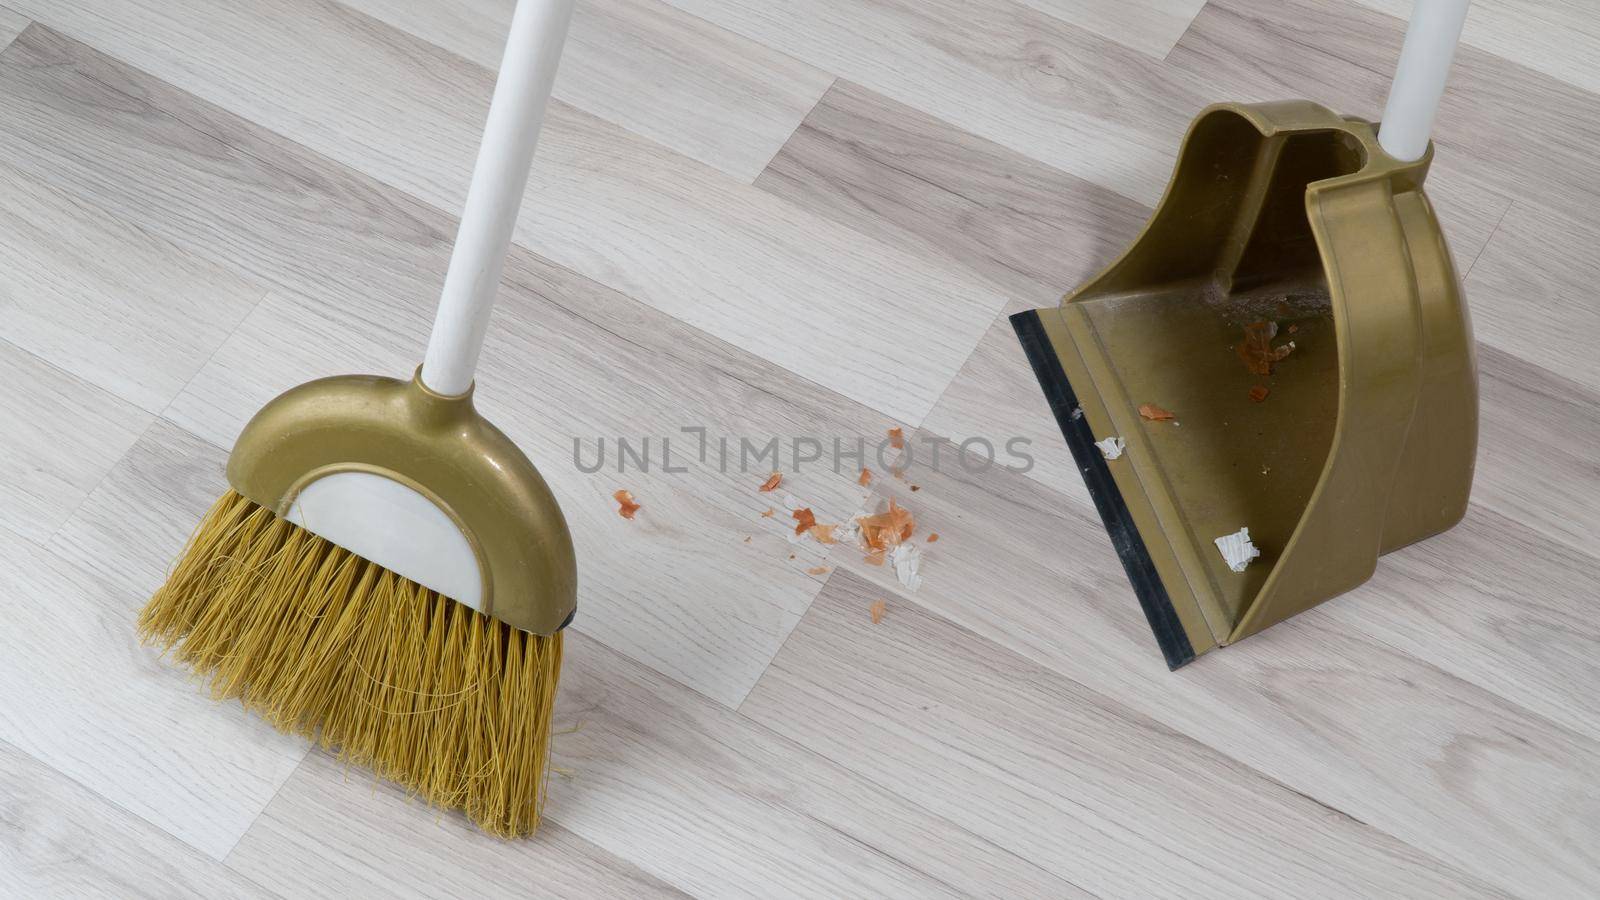 broom brush and scoop sweeping dirt off the laminate floor without people. High quality photo